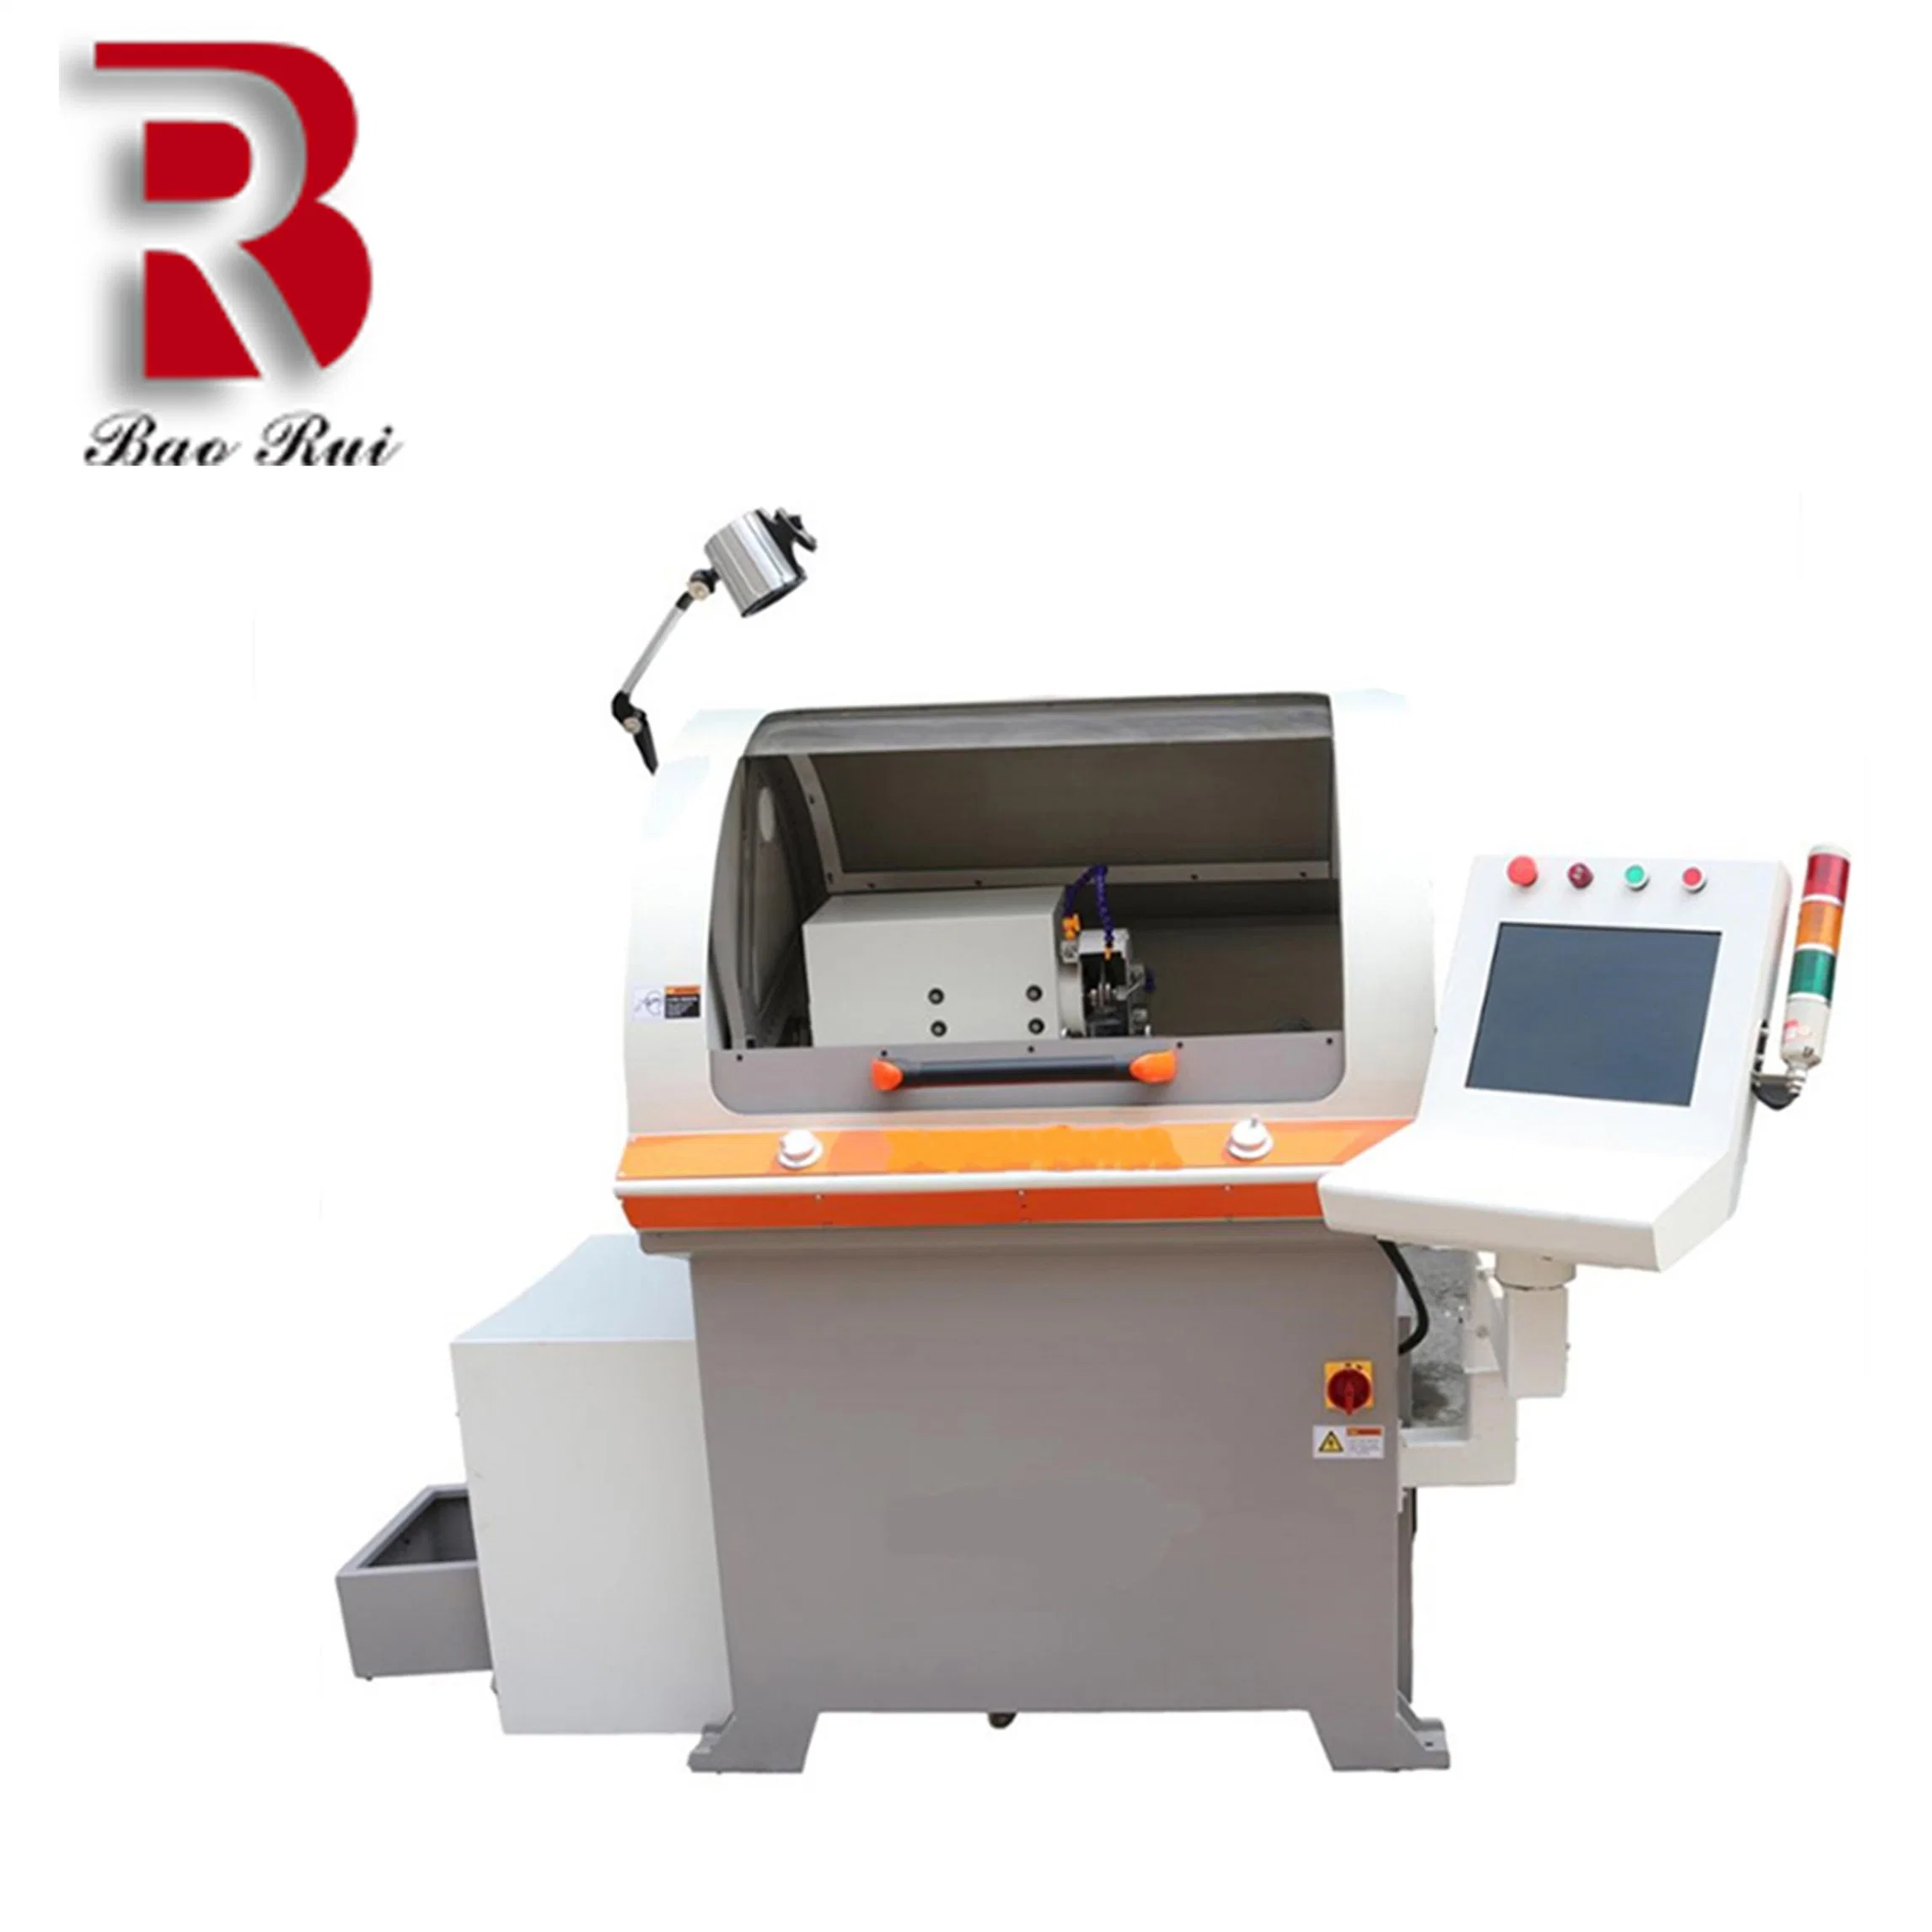 CNC Automatic Saw Blade Sharpening Machine Fully Automatic and Easy to Use Circulat Saw Blade Sharpener